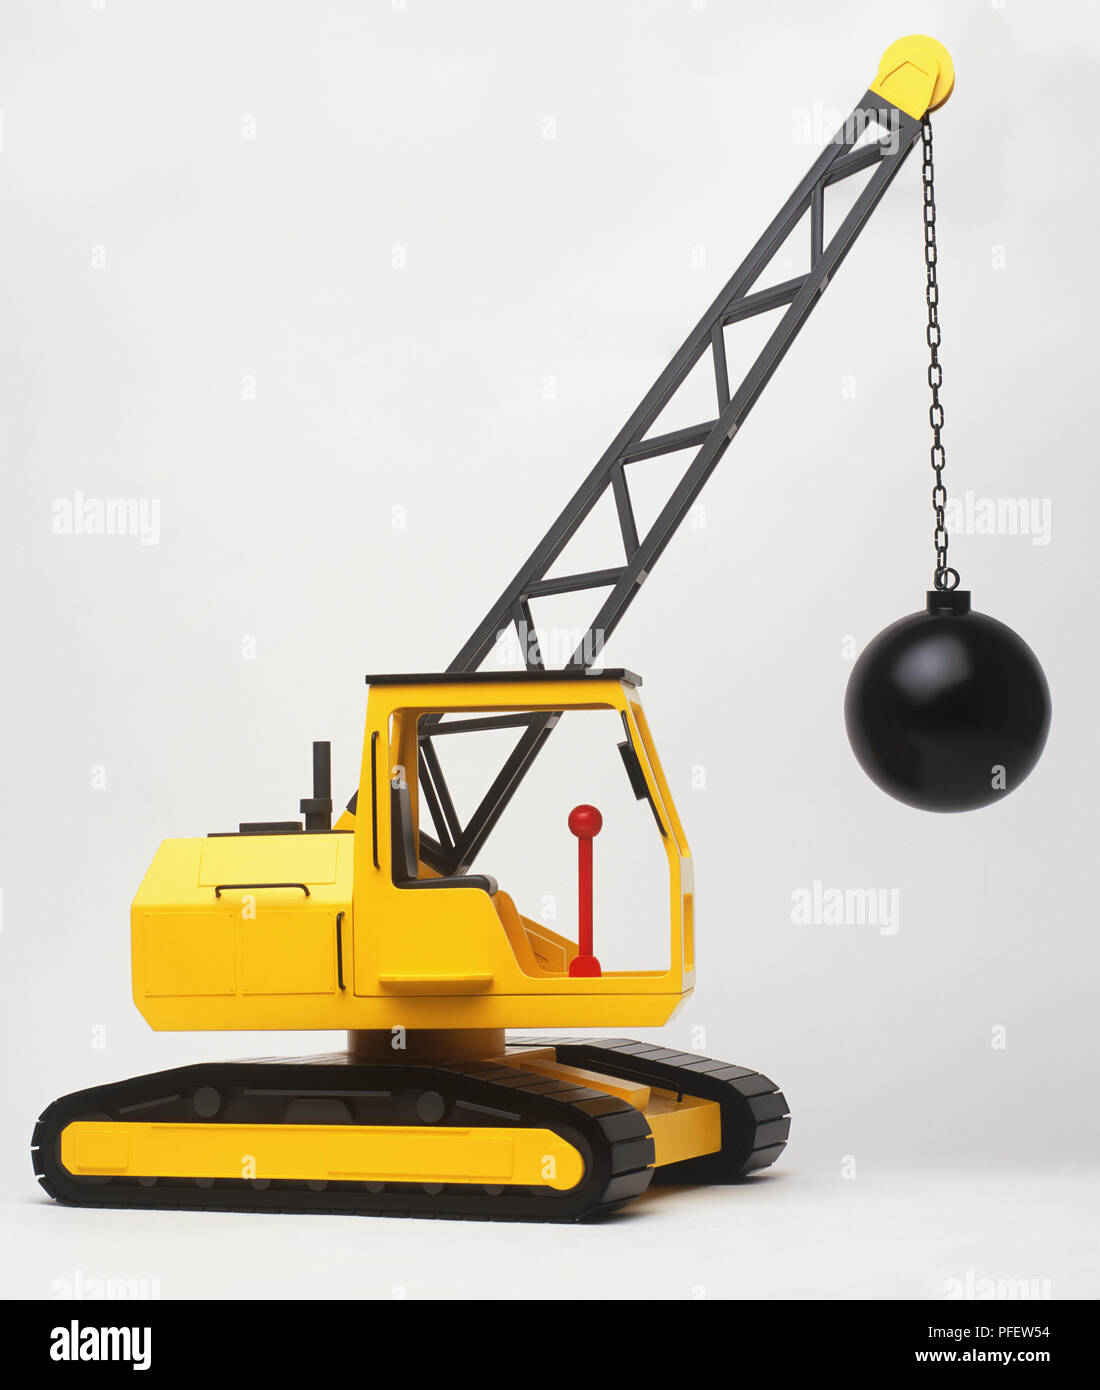 Toy crane with a demolition ball hanging from the arm. Stock Photo